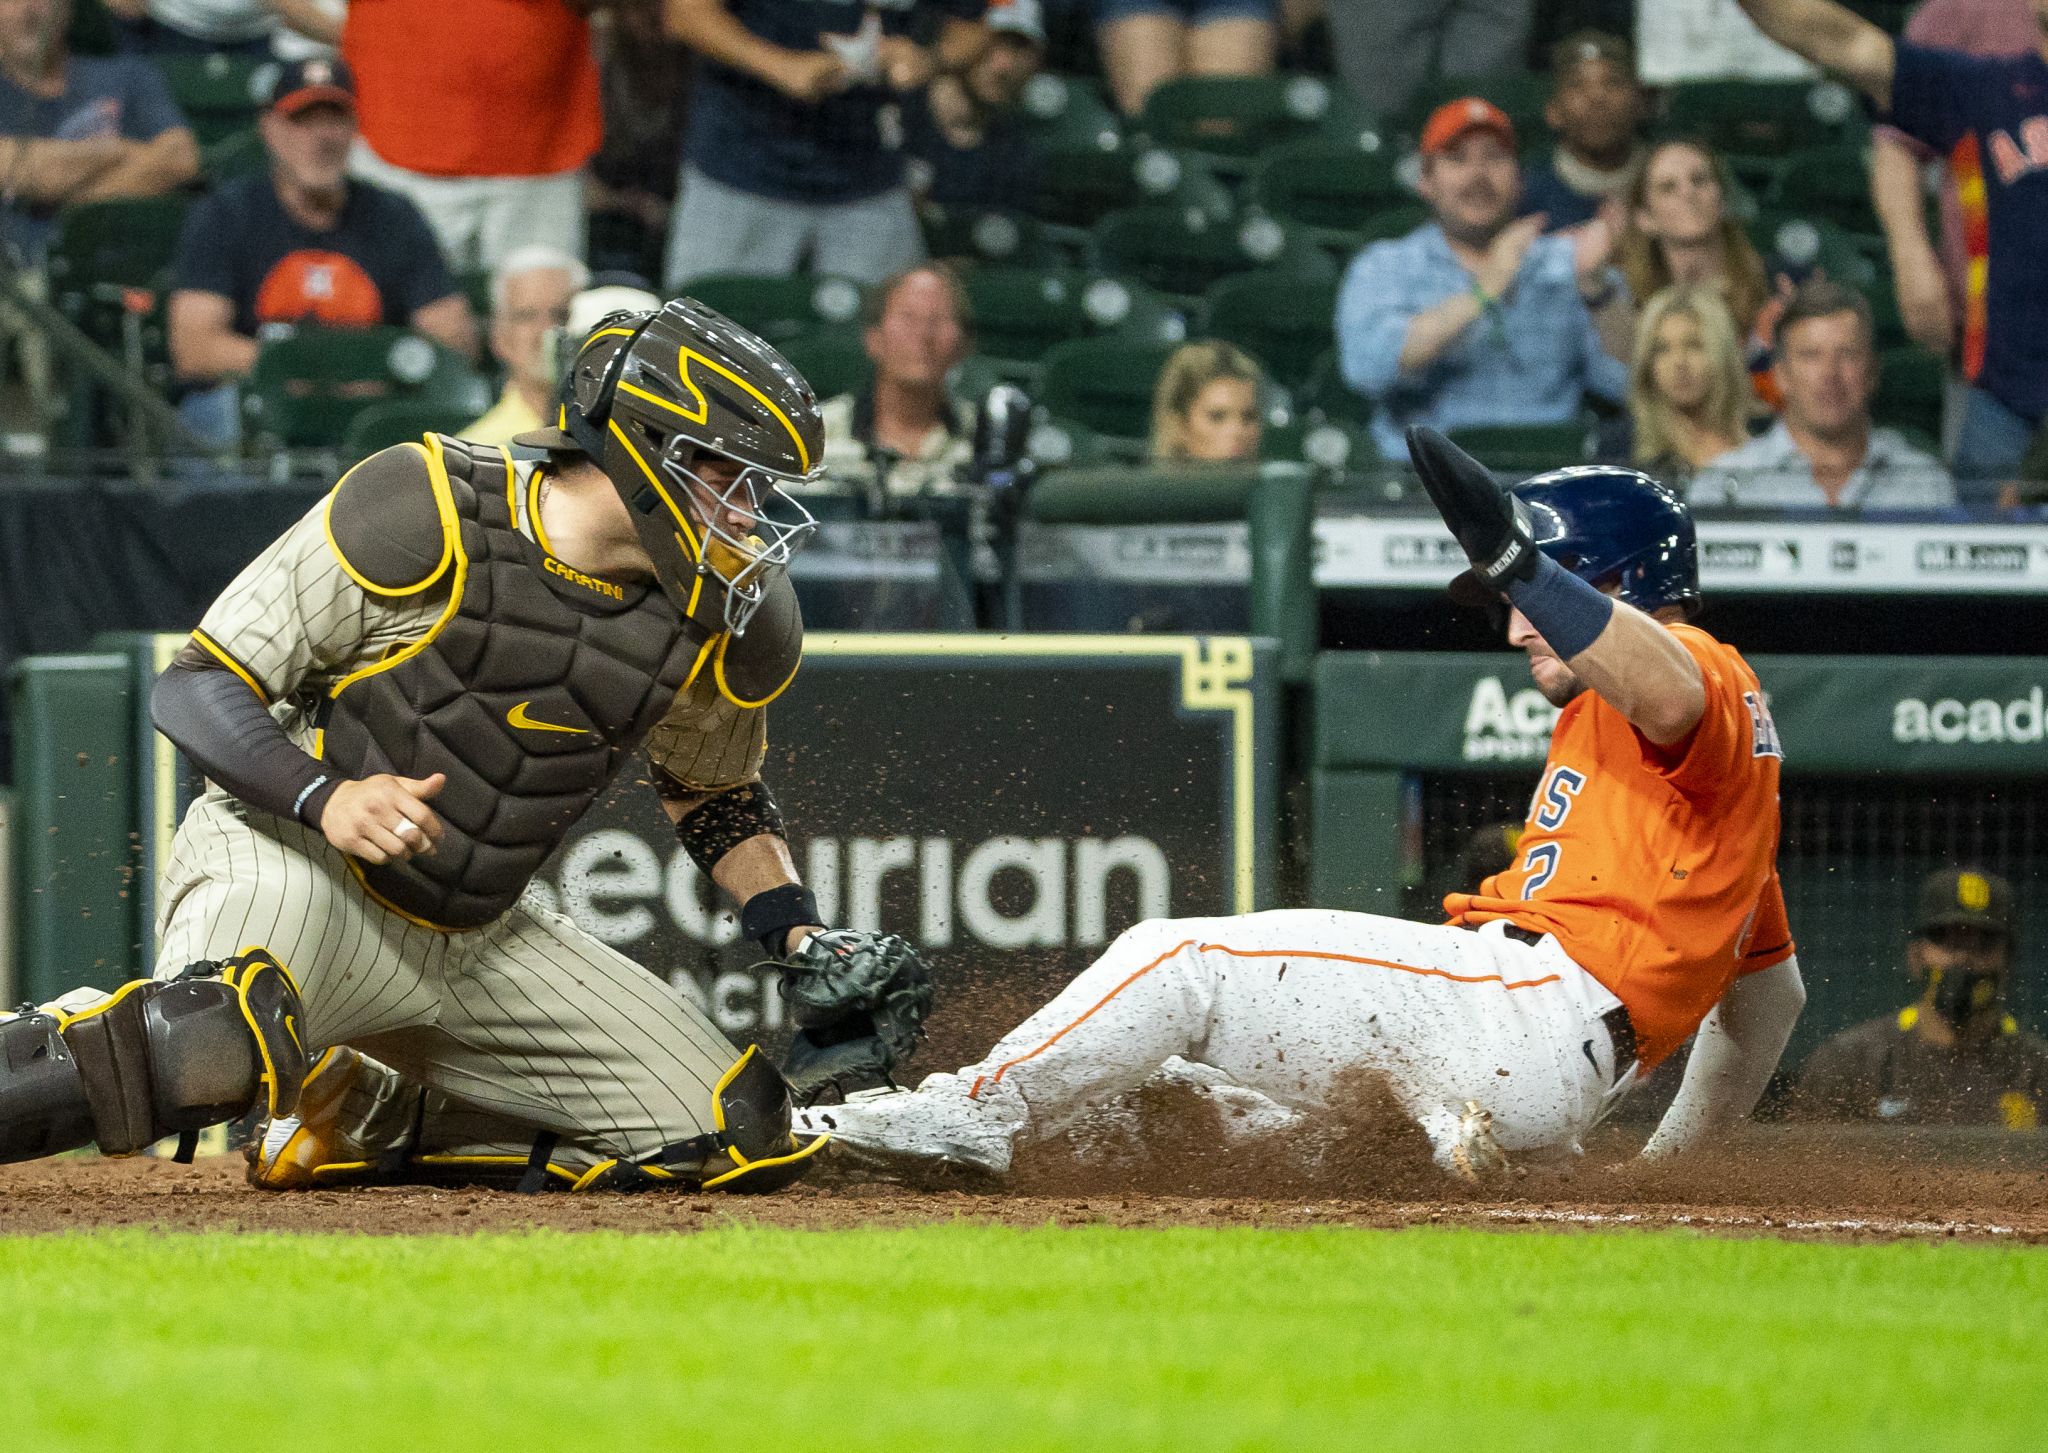 Houston Astros: How to watch Friday's game vs. Padres that's not on TV